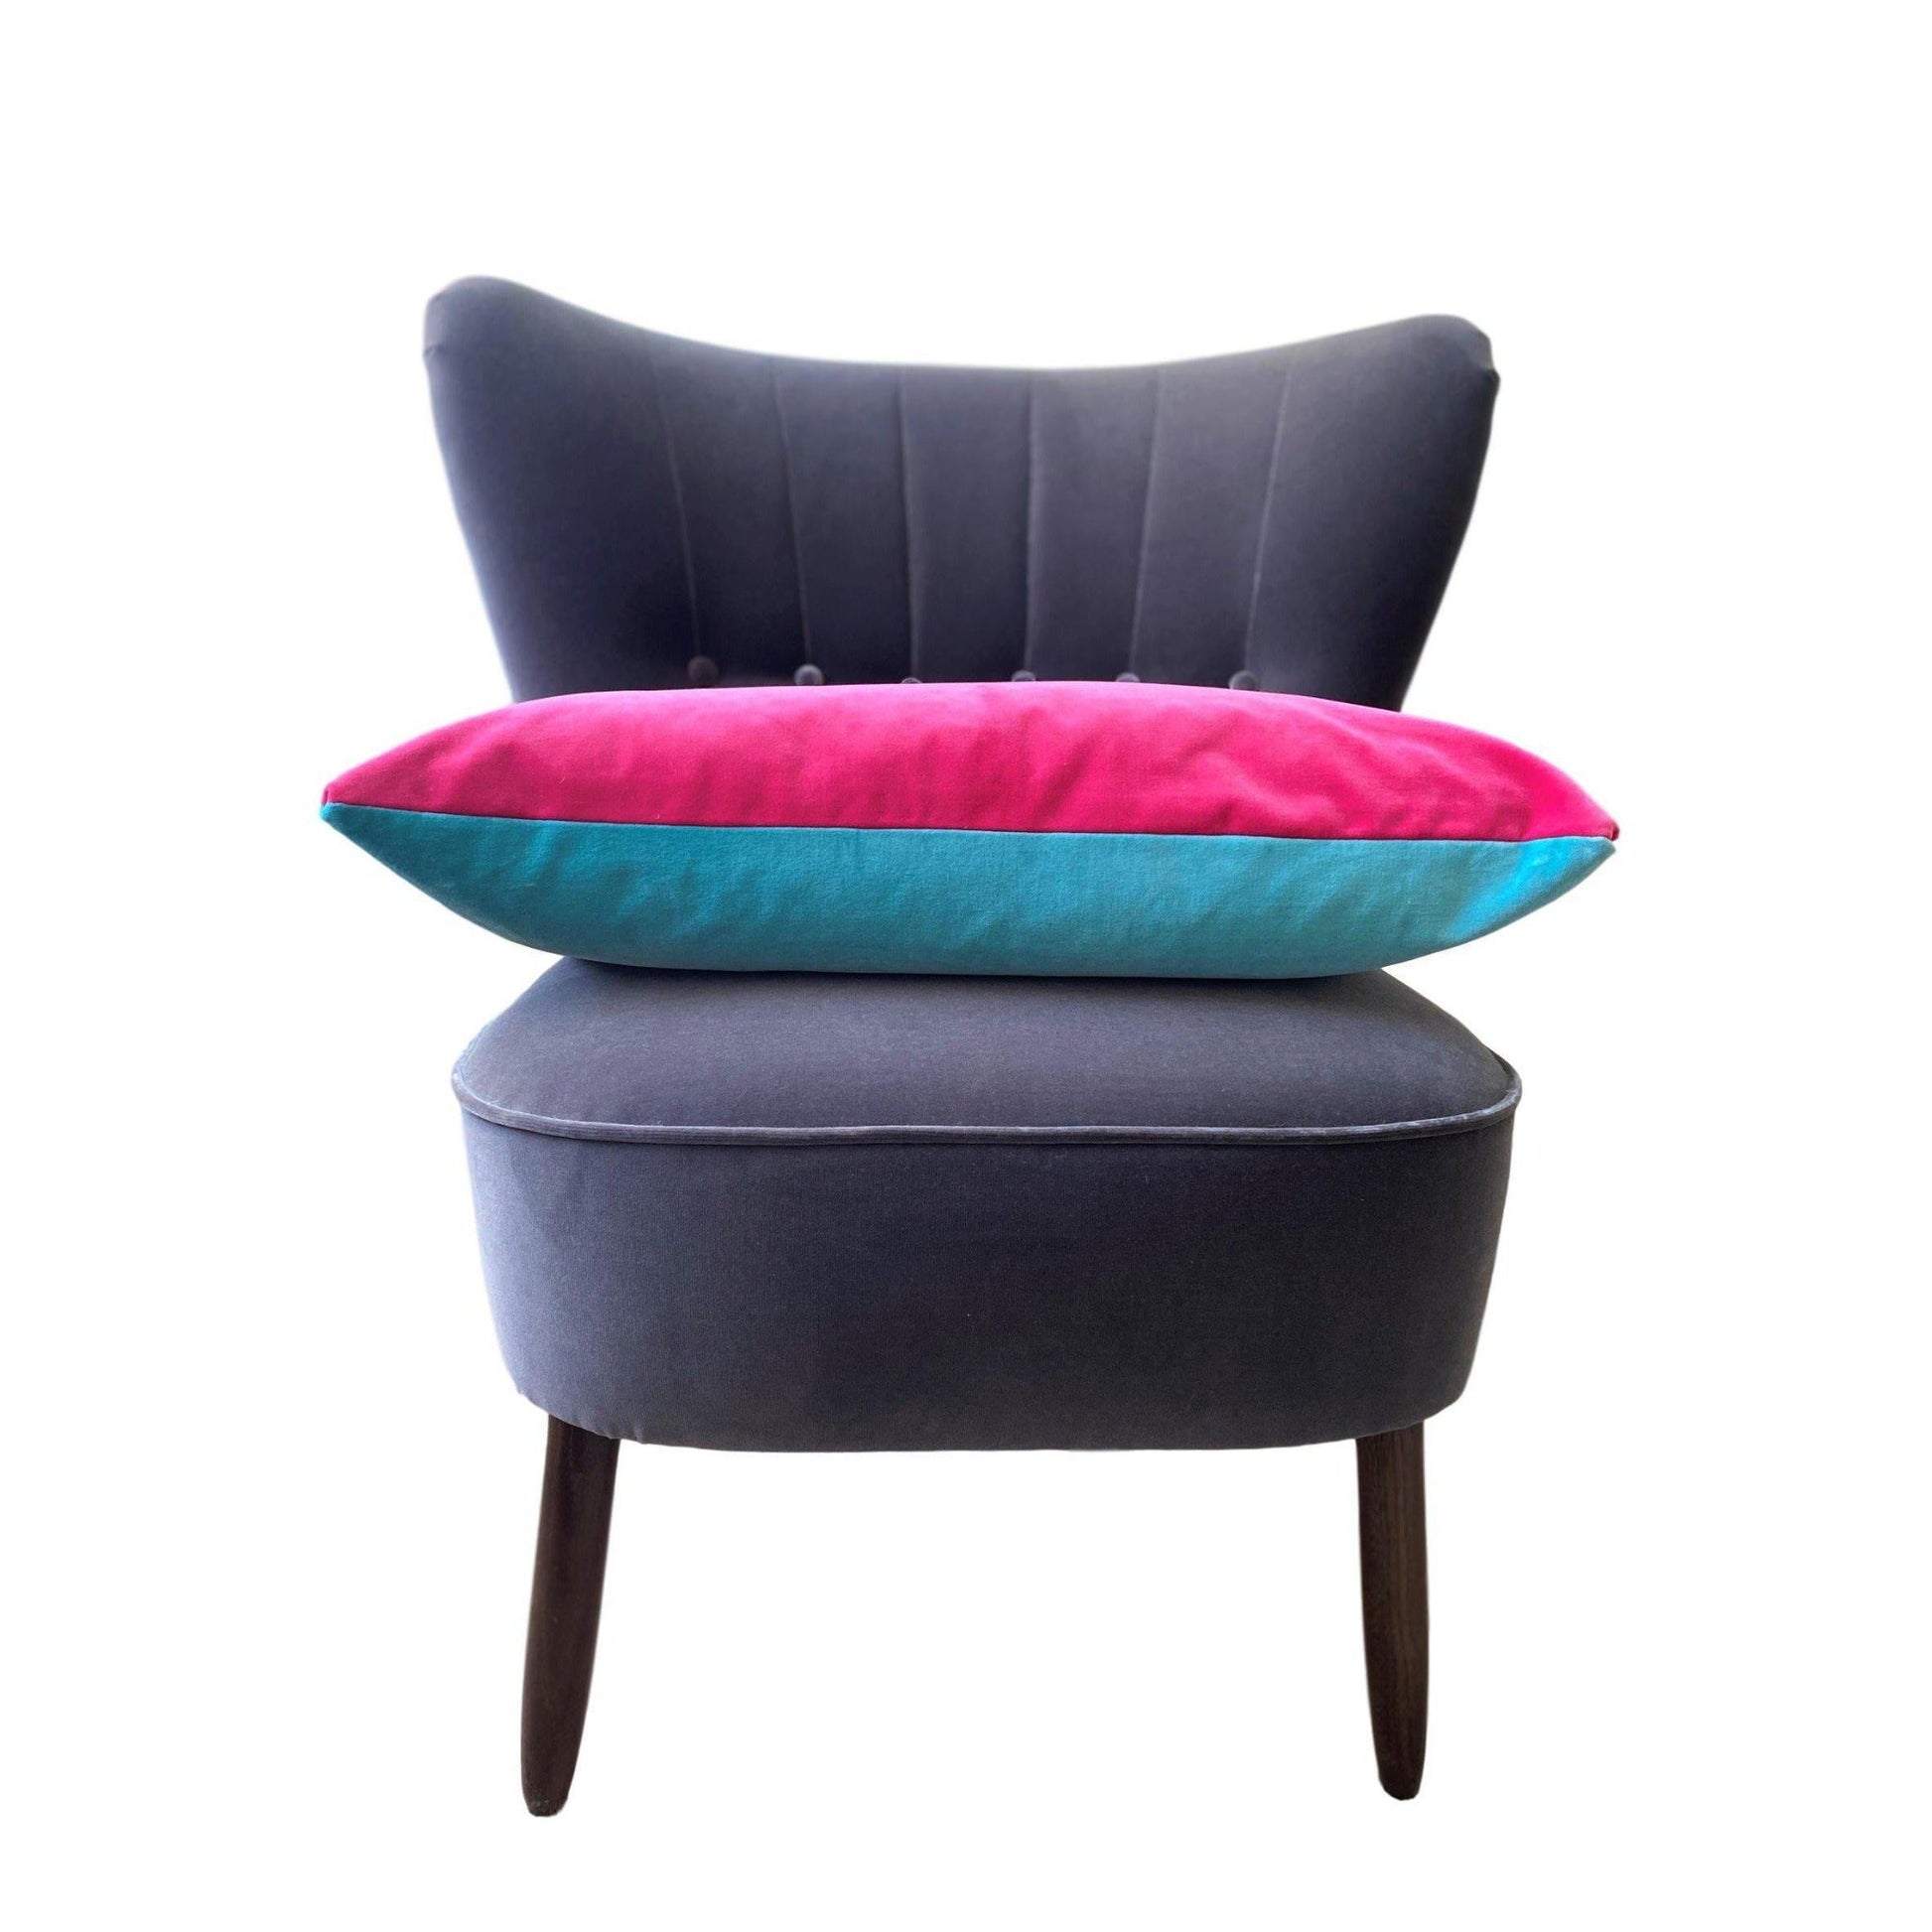 Bright Pink Velvet Cushion Cover with Turquoise-Luxe 39